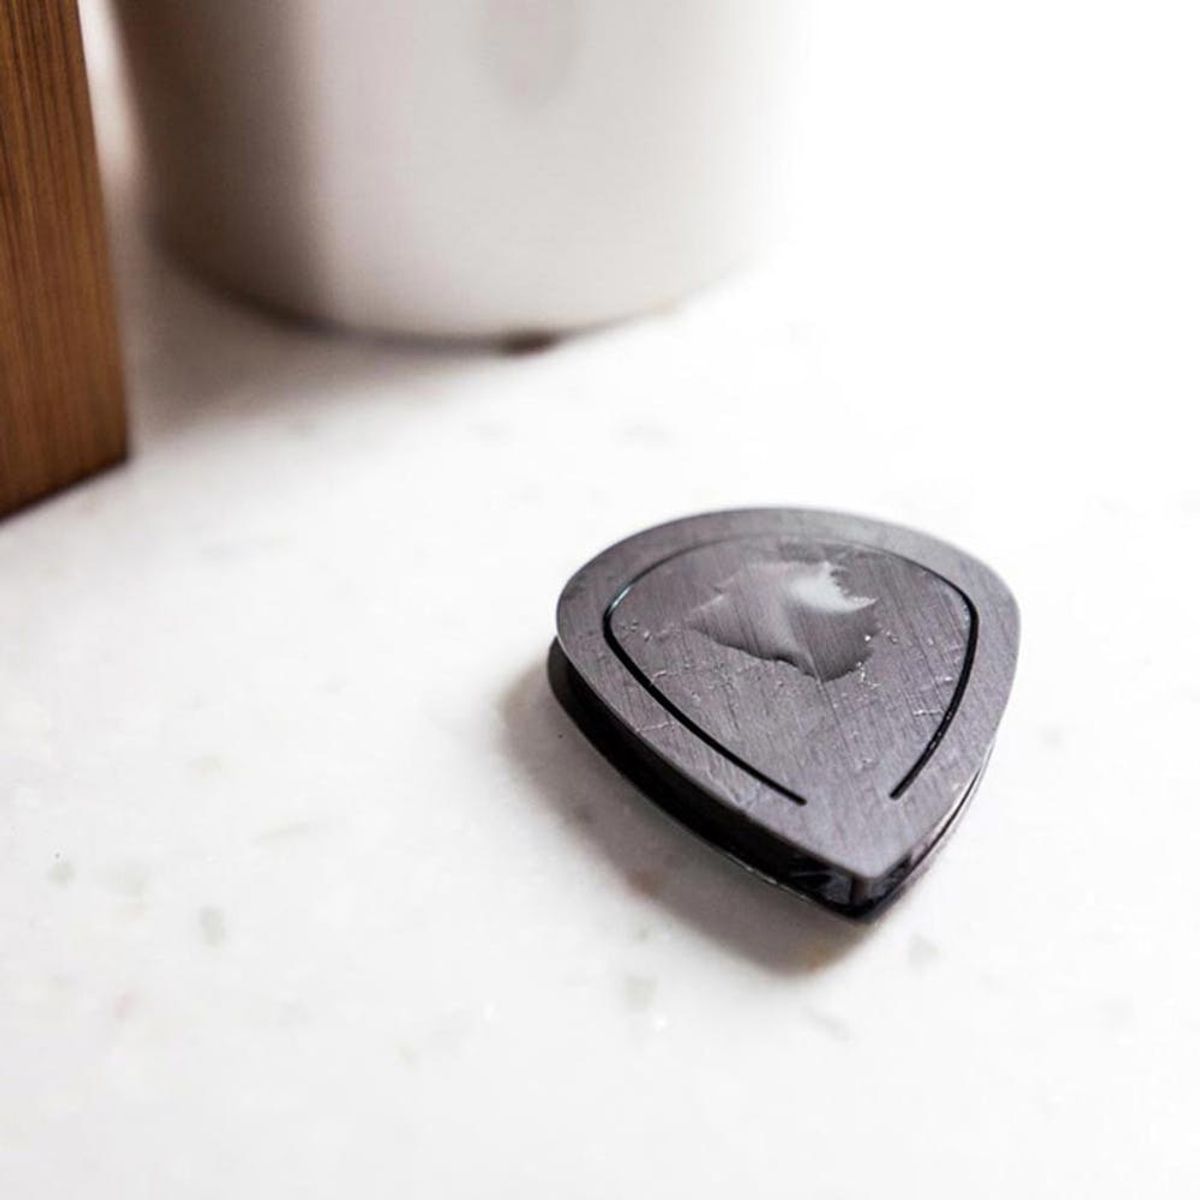 This Multifunction Button Is Going to Simplify Your Life